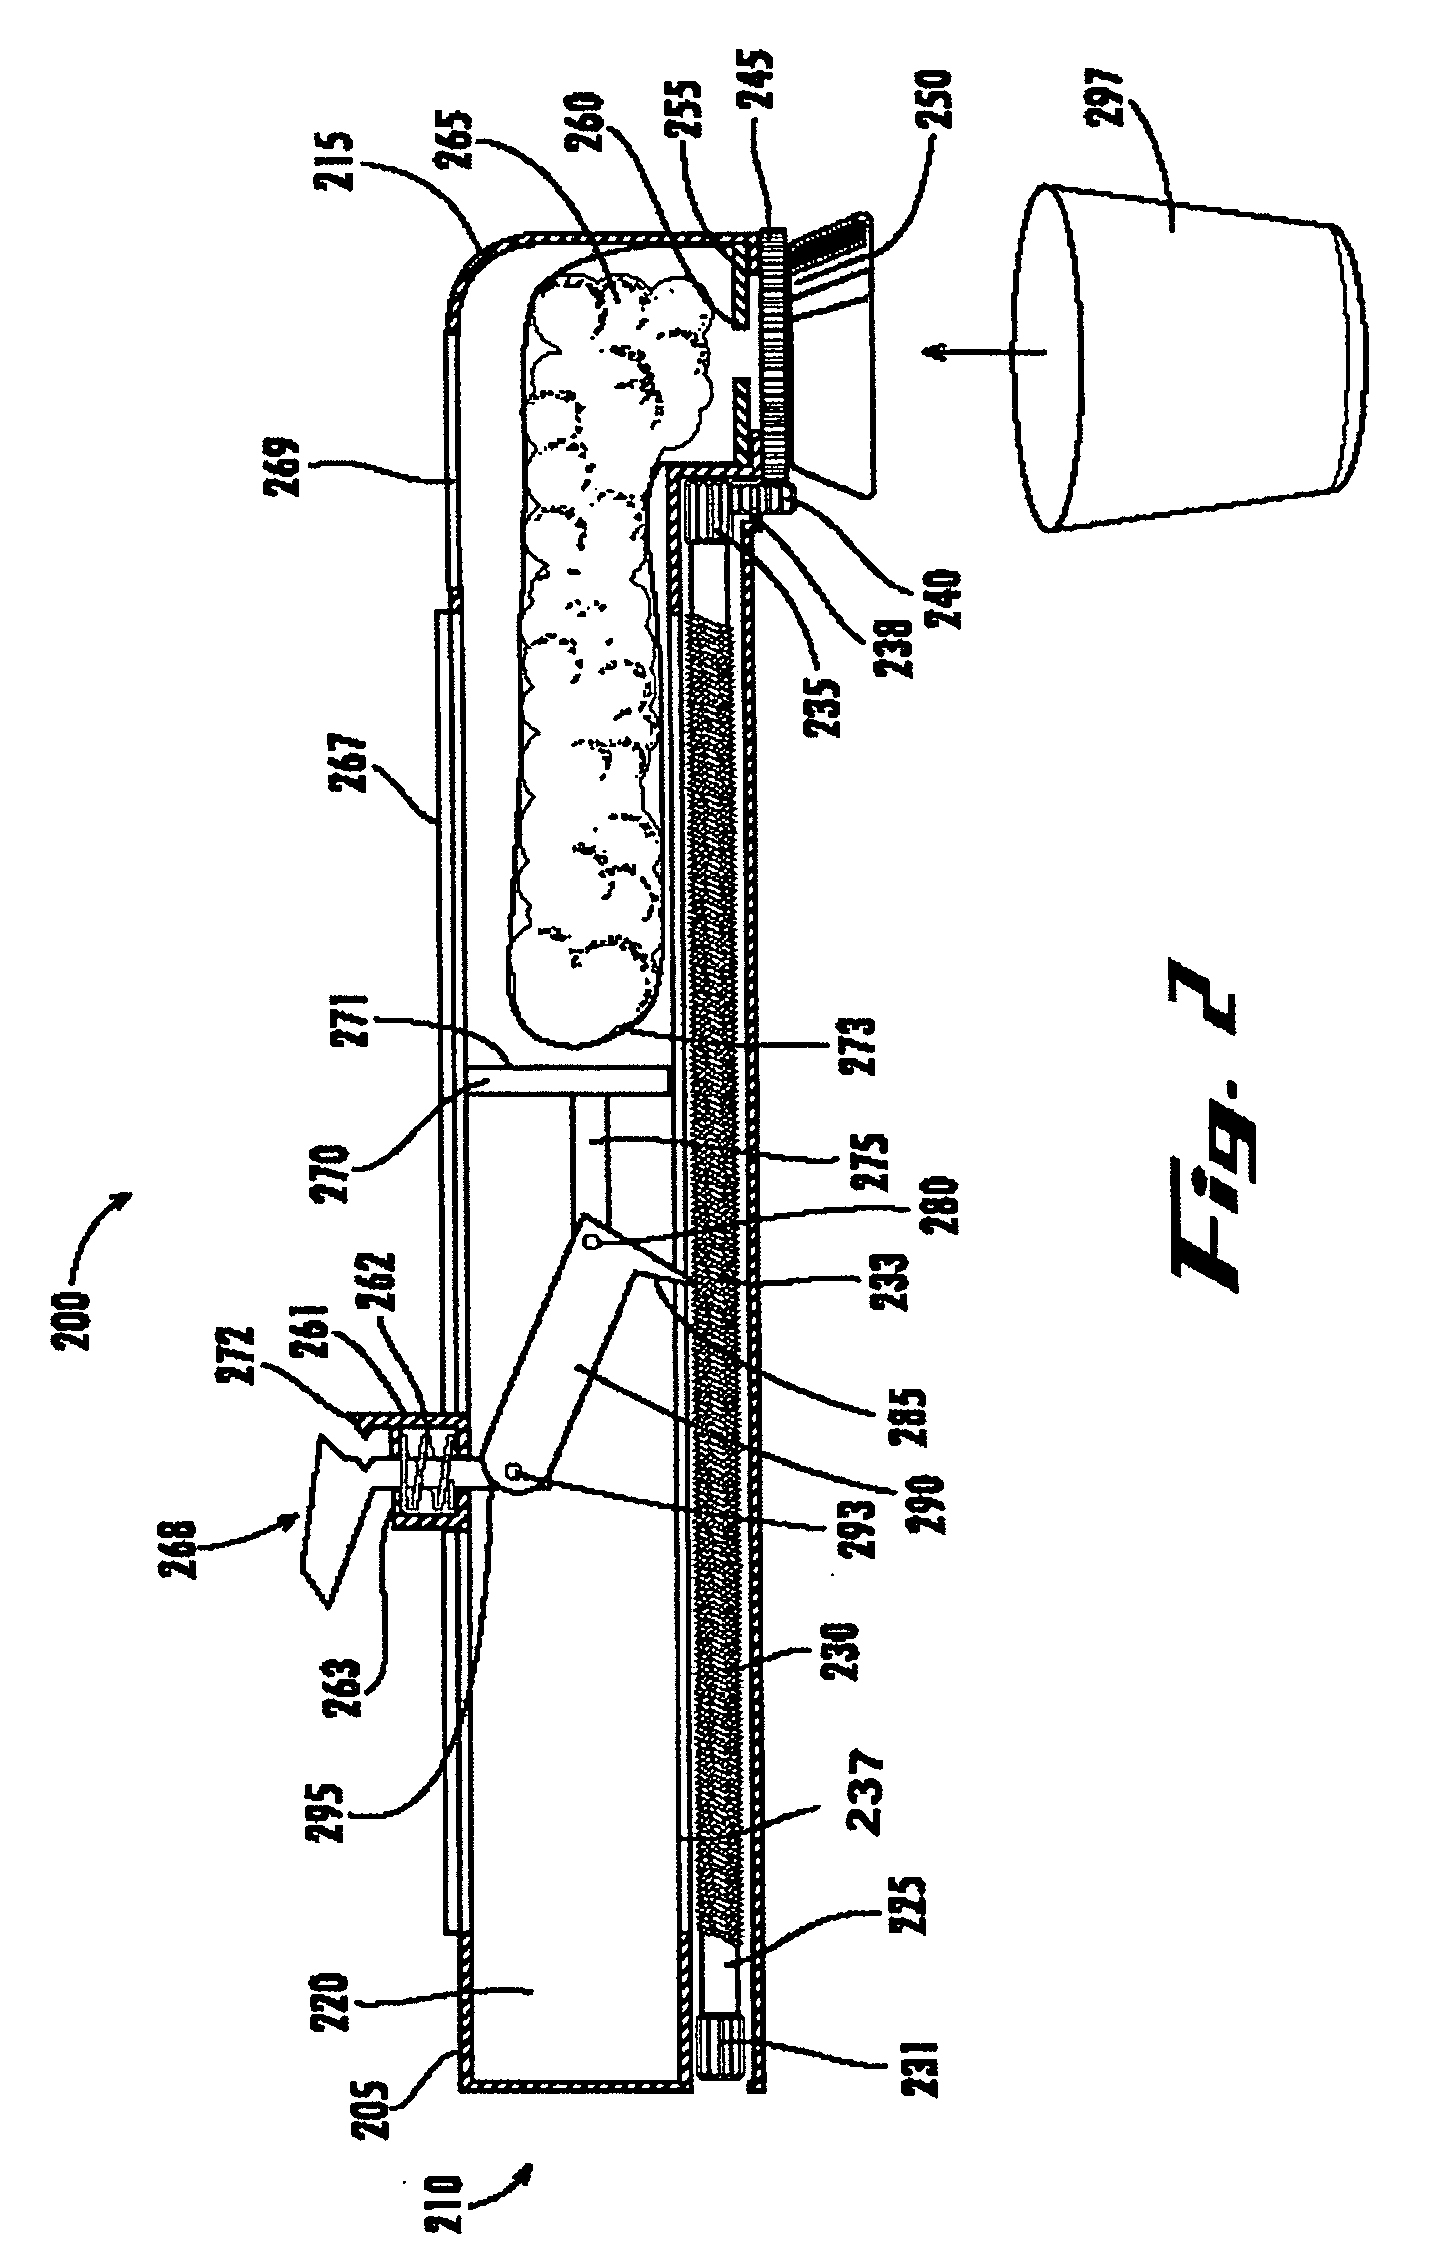 Self-contained dental prophylaxis angle with offset rotational axis